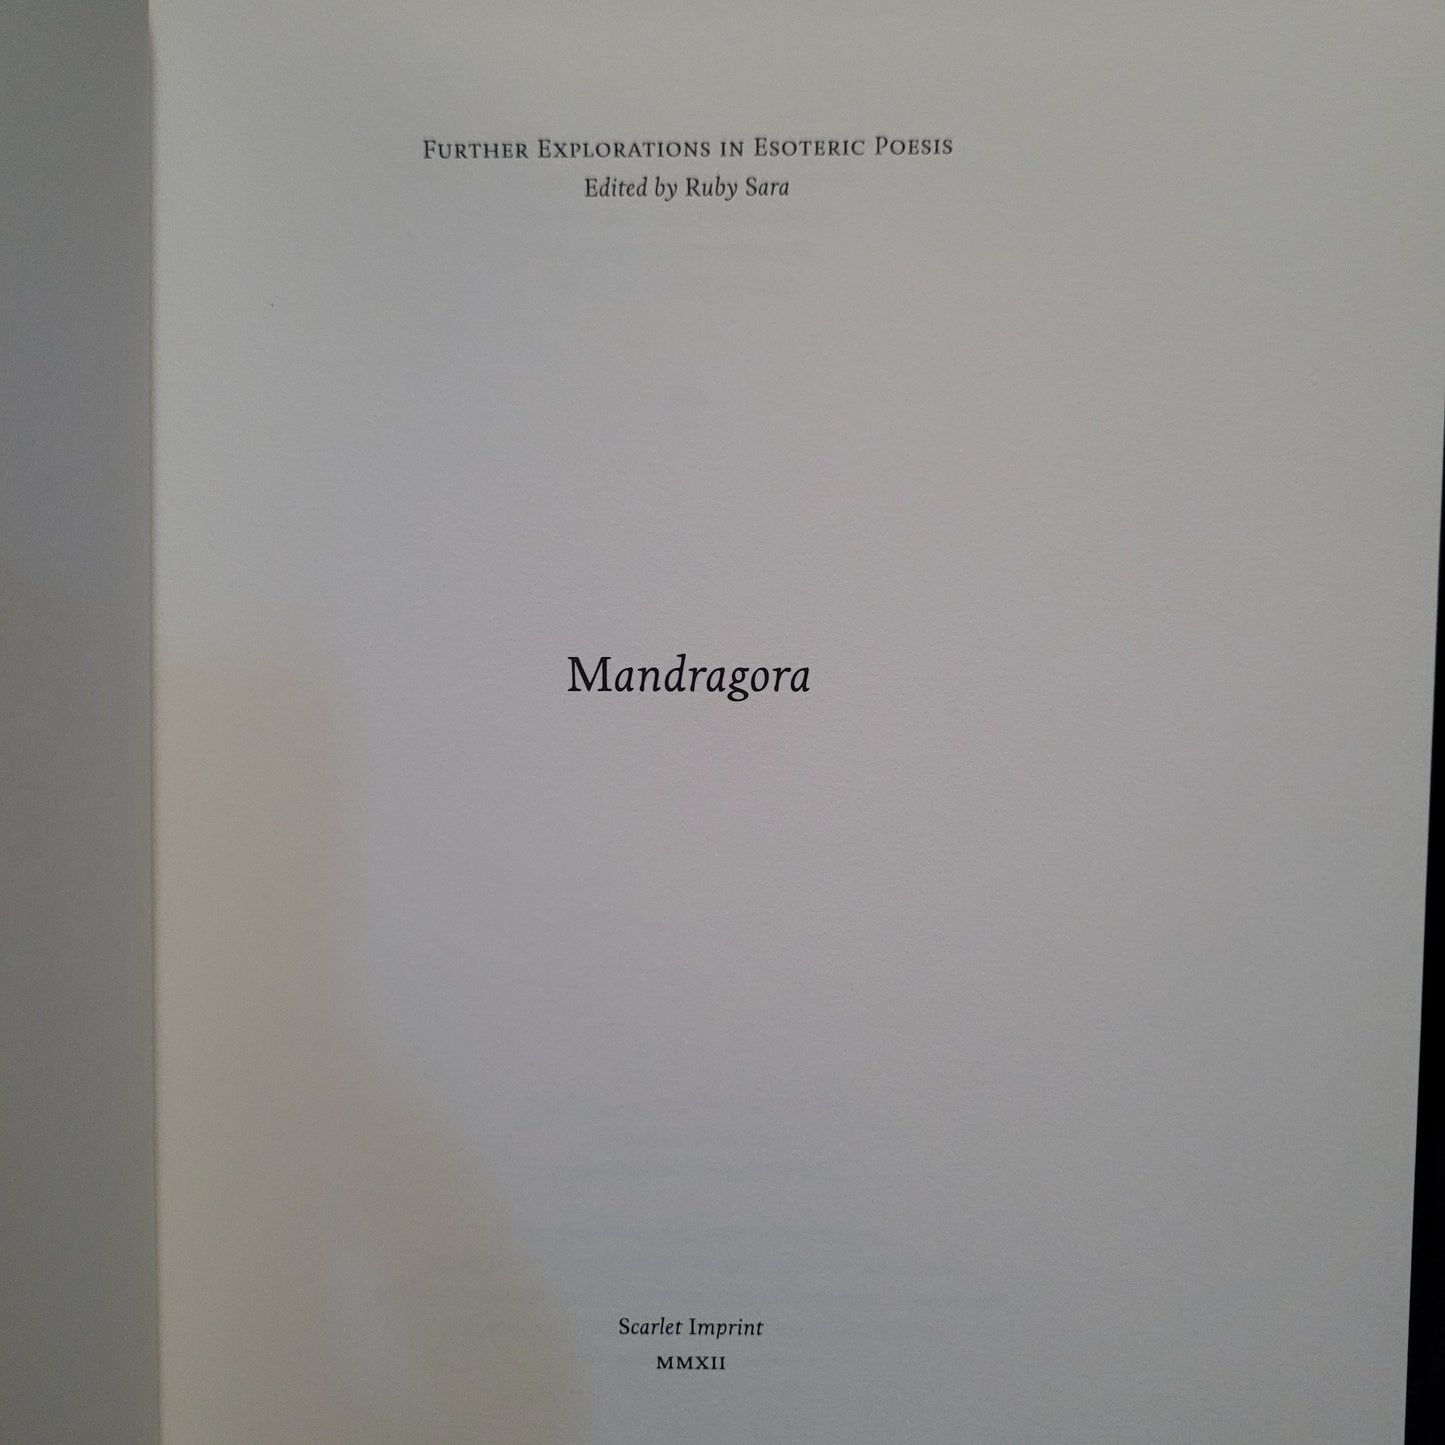 Mandragora: Further Explorations in Esoteric Poesis Edited by Ruby Sara (Scarlet Imprint, 2012) Limited Edition Hardback